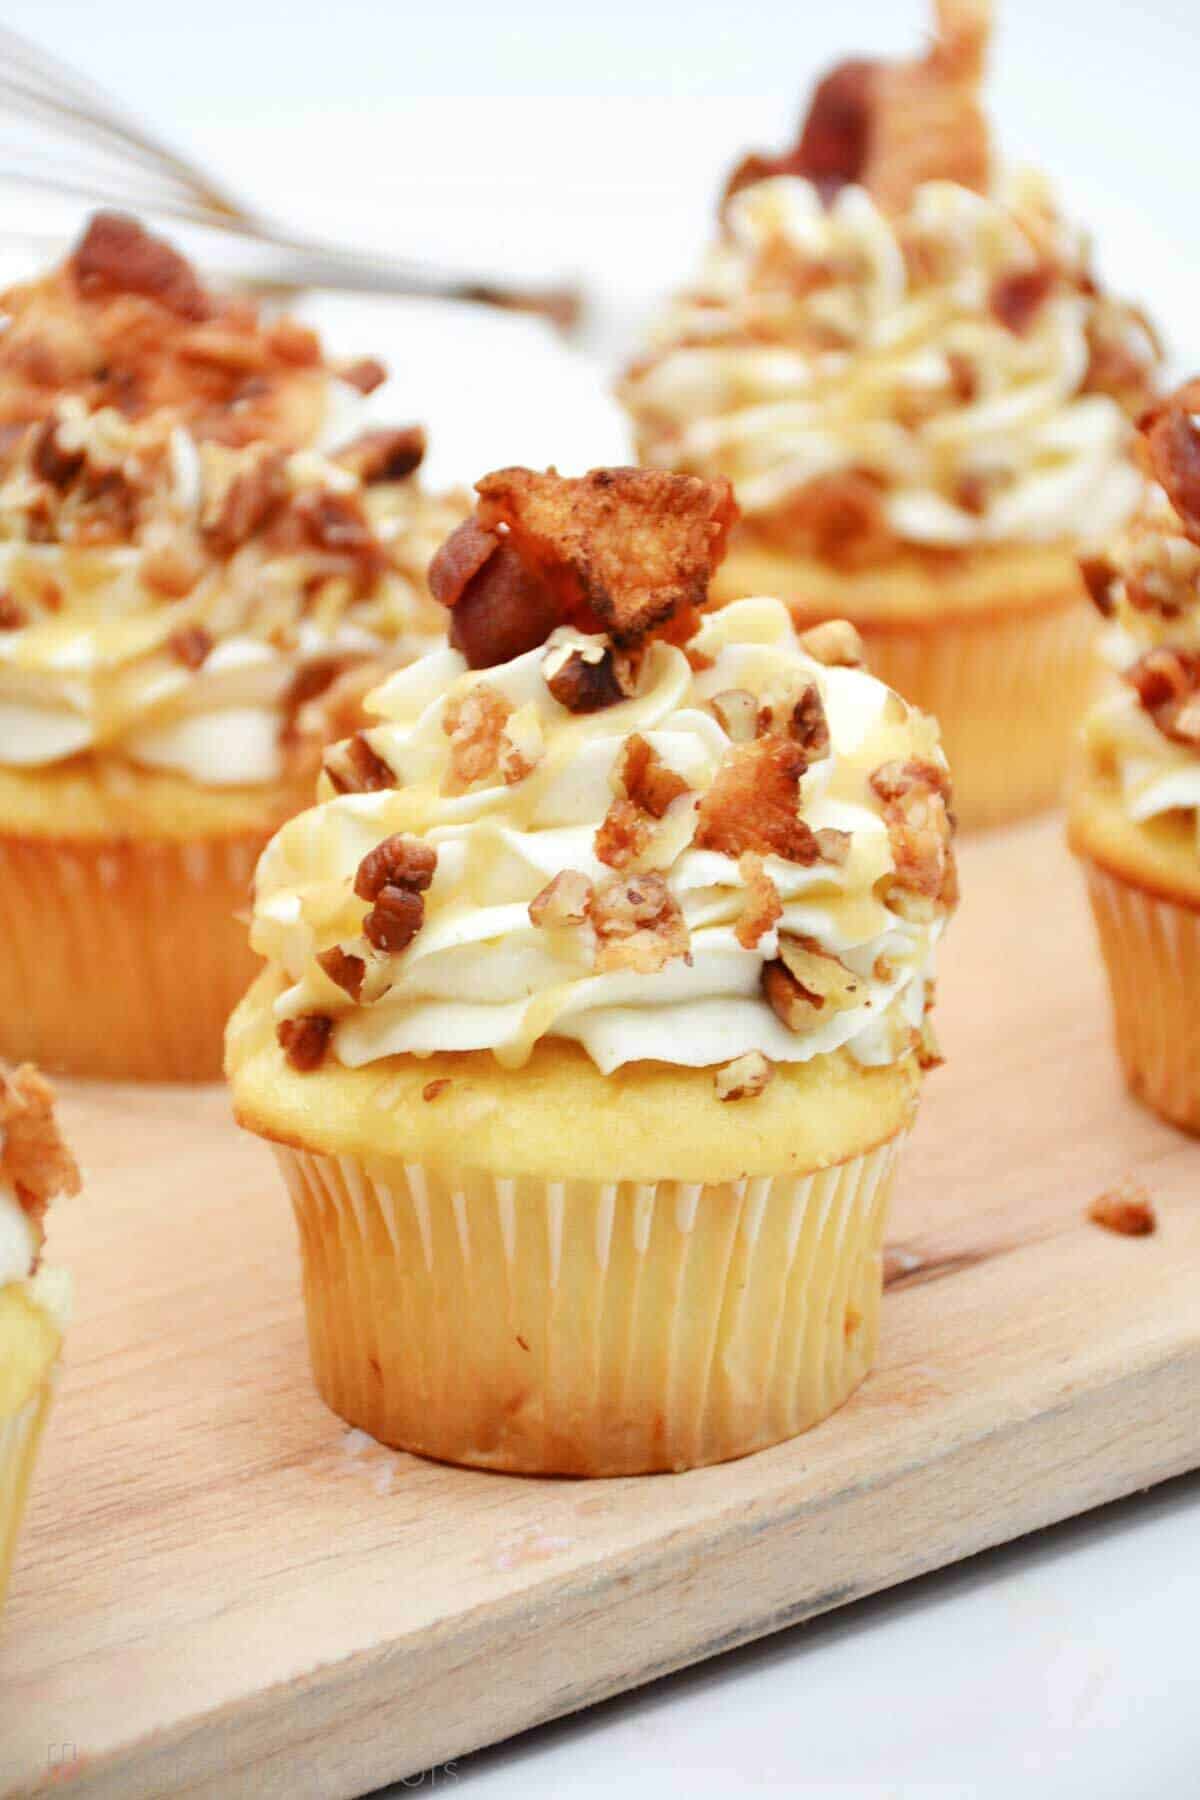 Vertical image of a close up of a whiskey maple bacon cupcake recipe topped with chopped pecans, bacon, and a whiskey caramel drizzle sauce.